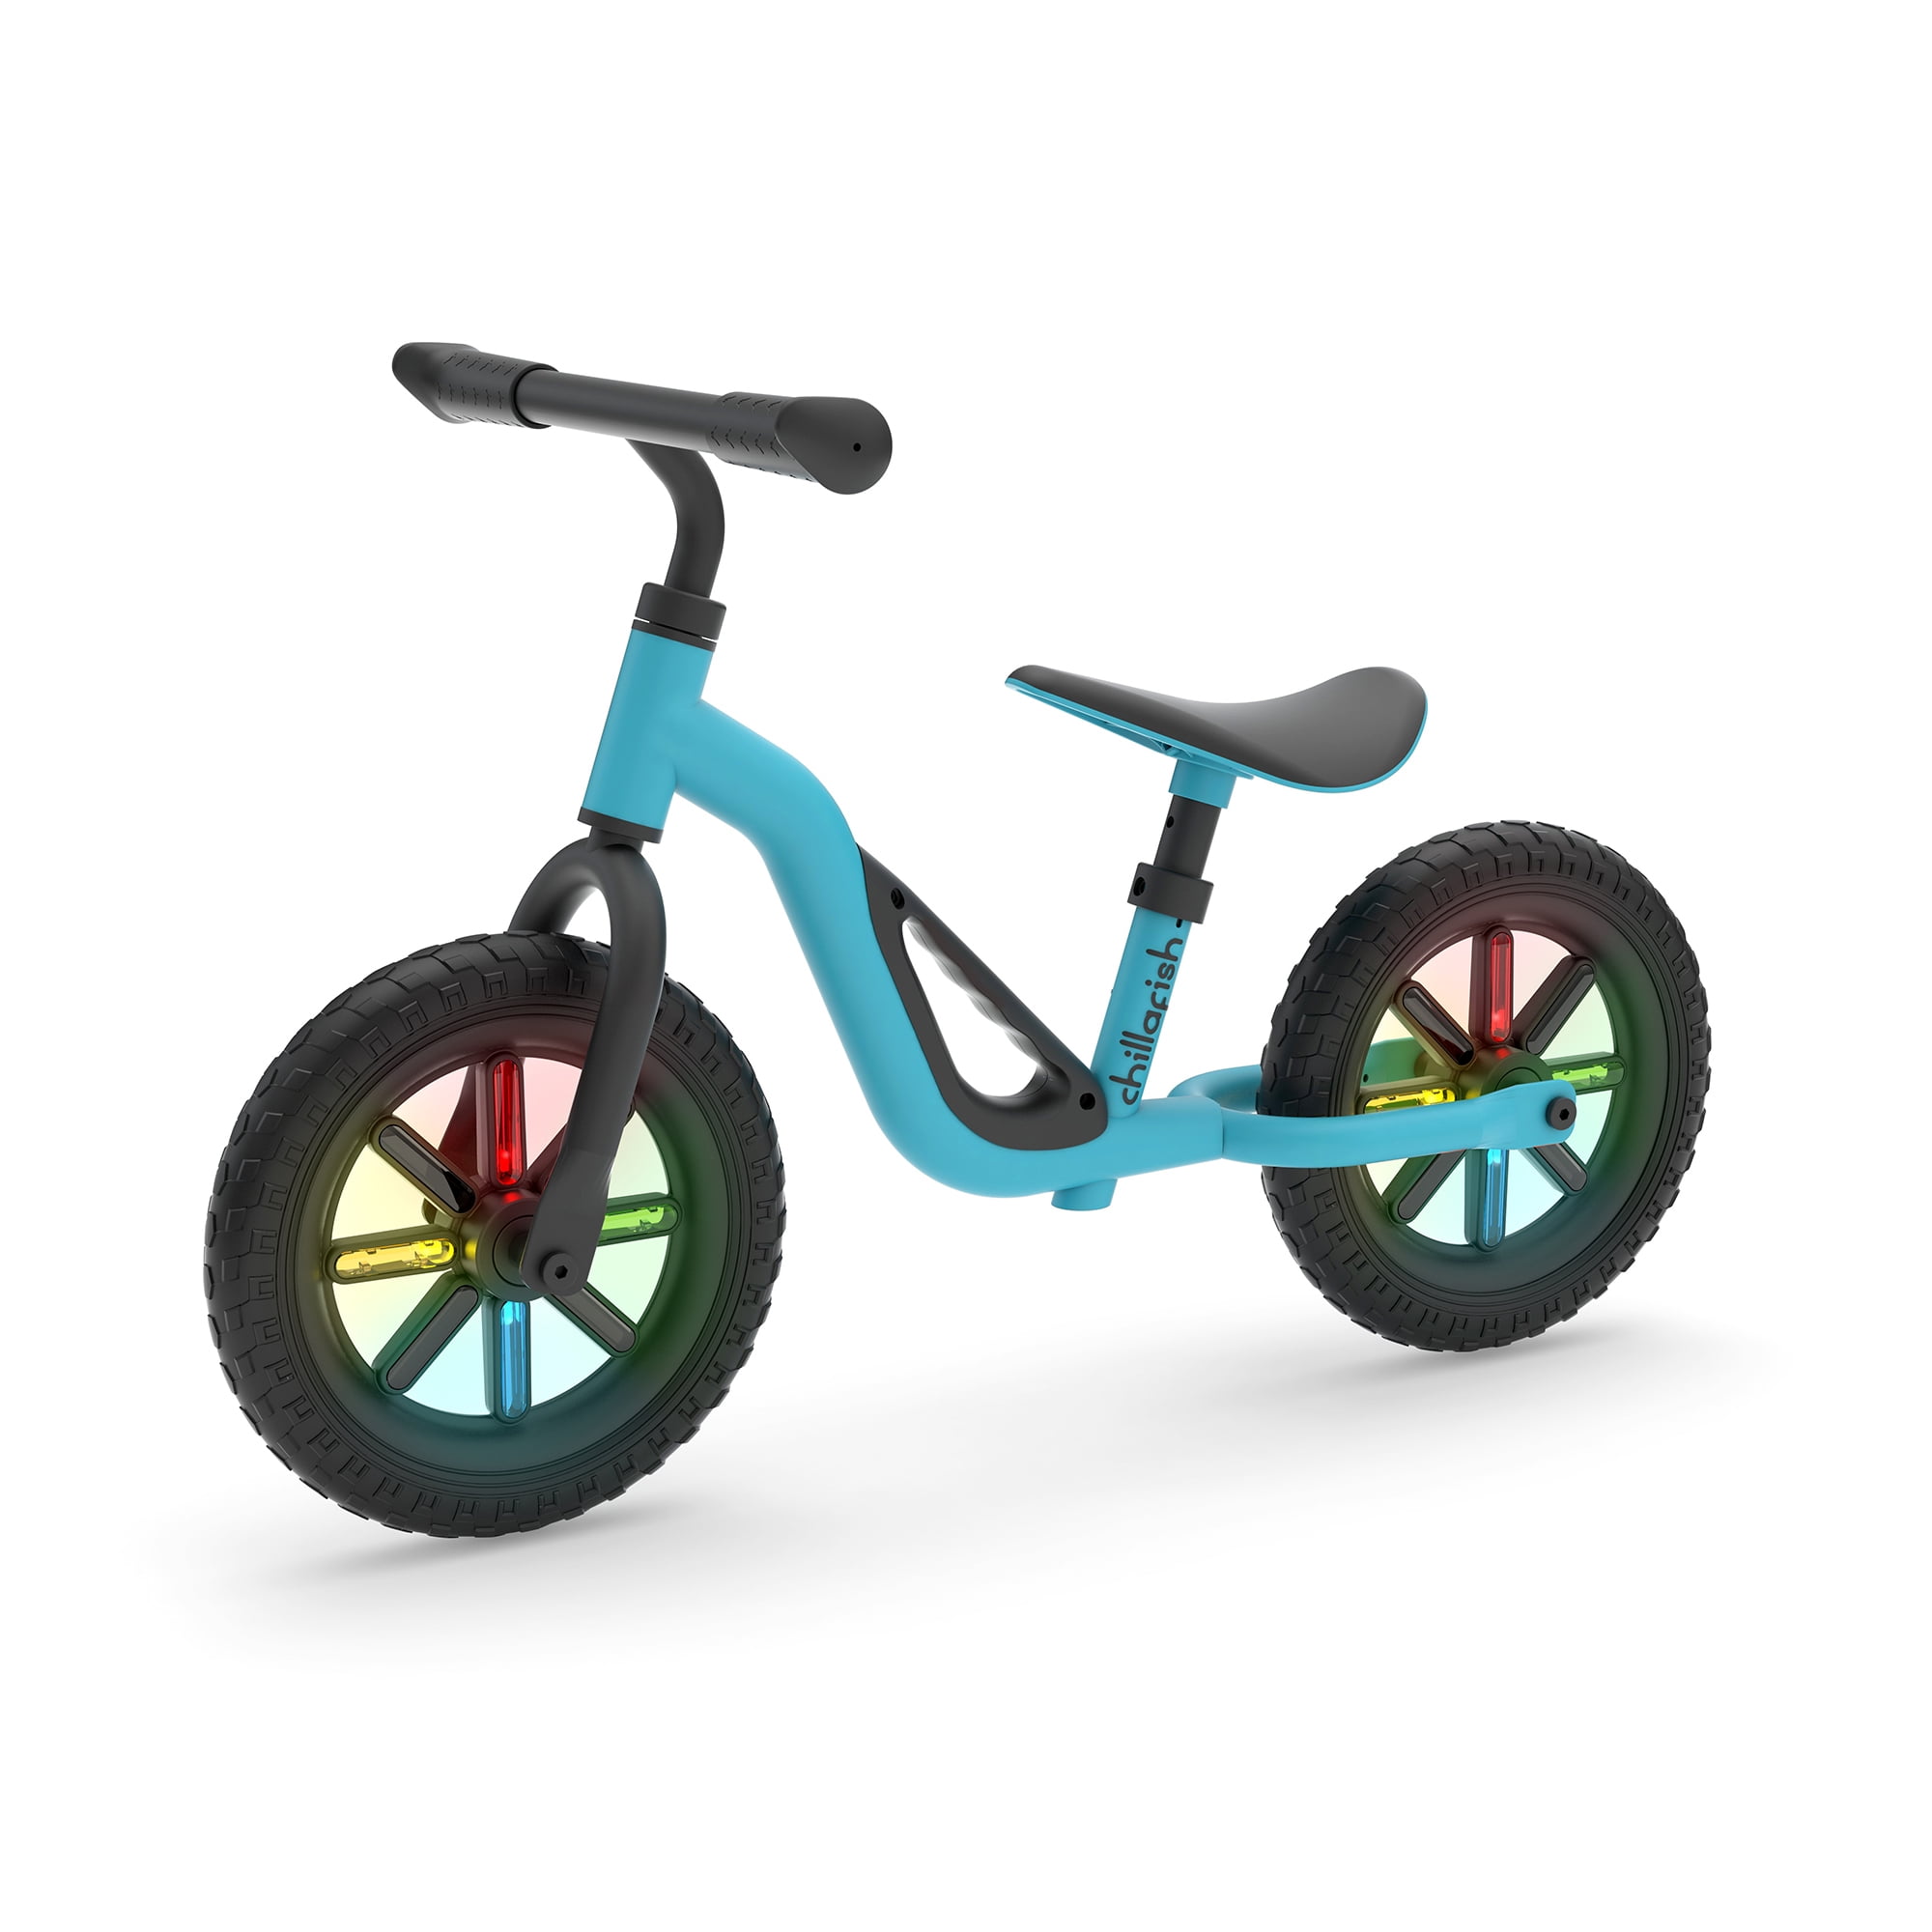 Details about   Chillafish Charlie Lightweight Toddler Balance Bike Cute Balance Trainer For 18 